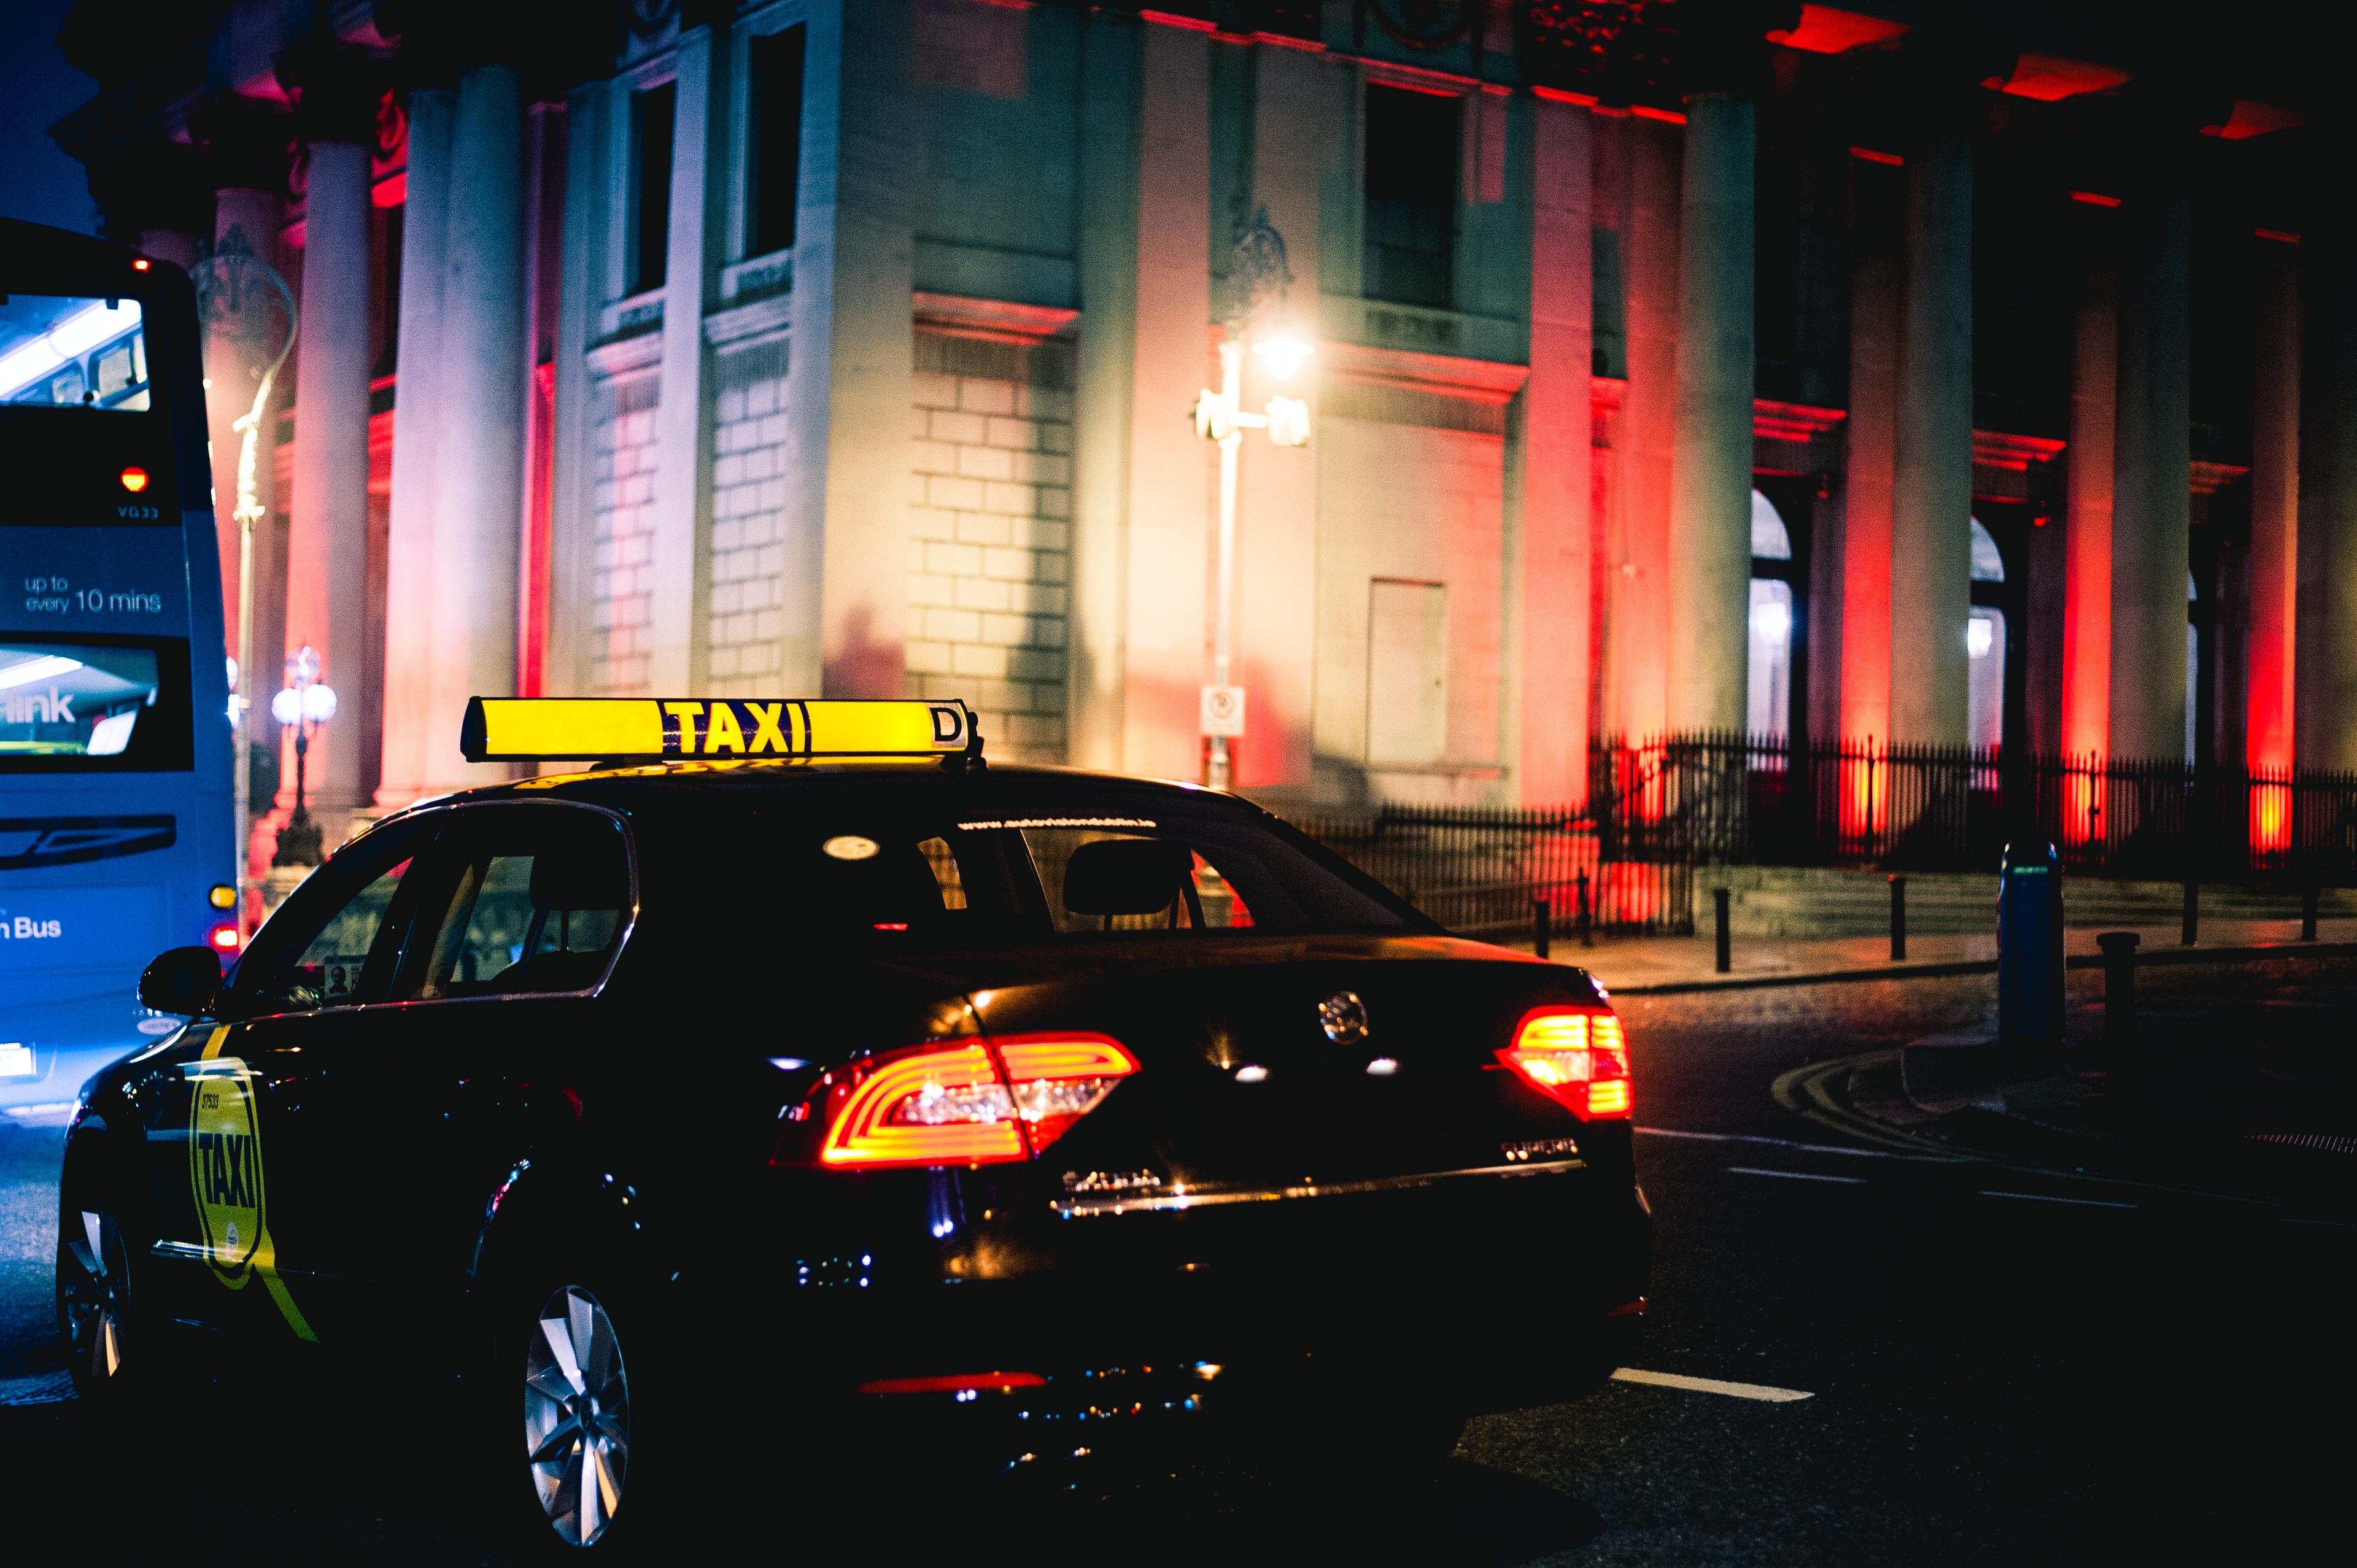 How to choose a car for taxi work in Ireland